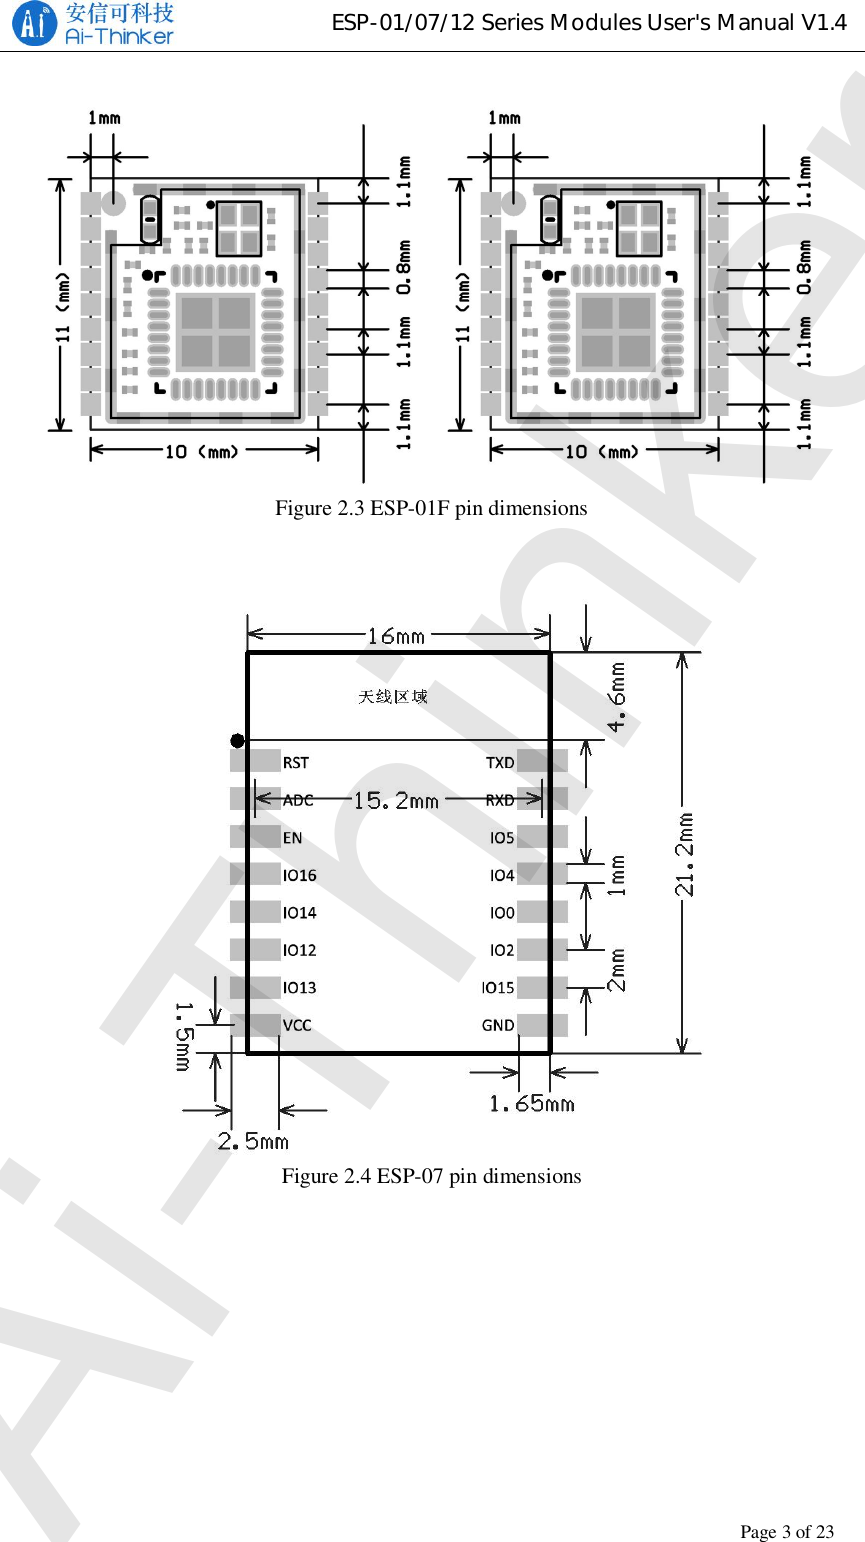 ESP-01/07/12 Series Modules User&apos;s Manual V1.4Copyright © 2017 Shenzhen Ai-Thinker Technology Co., Ltd All Rights ReservedPage3of23Figure 2.3 ESP-01F pin dimensionsFigure 2.4 ESP-07 pin dimensionsAi-Thinker